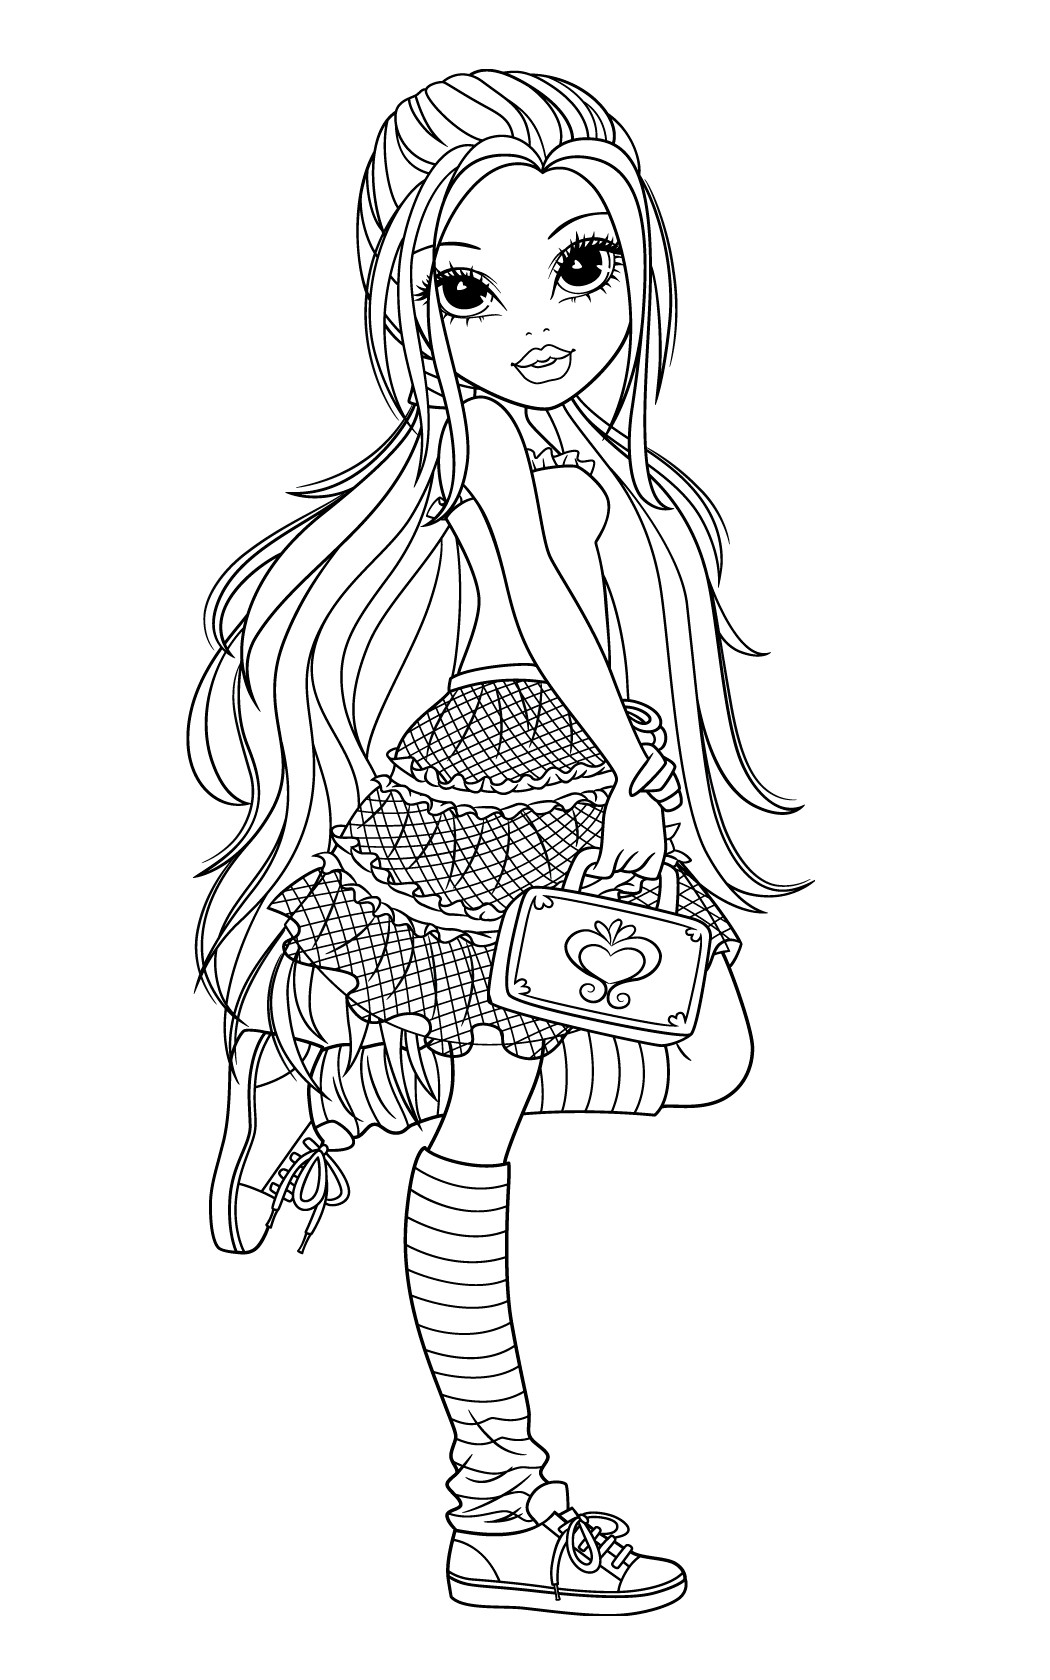 Coloring Pages For Adults Girls
 moxie girlz coloring pages